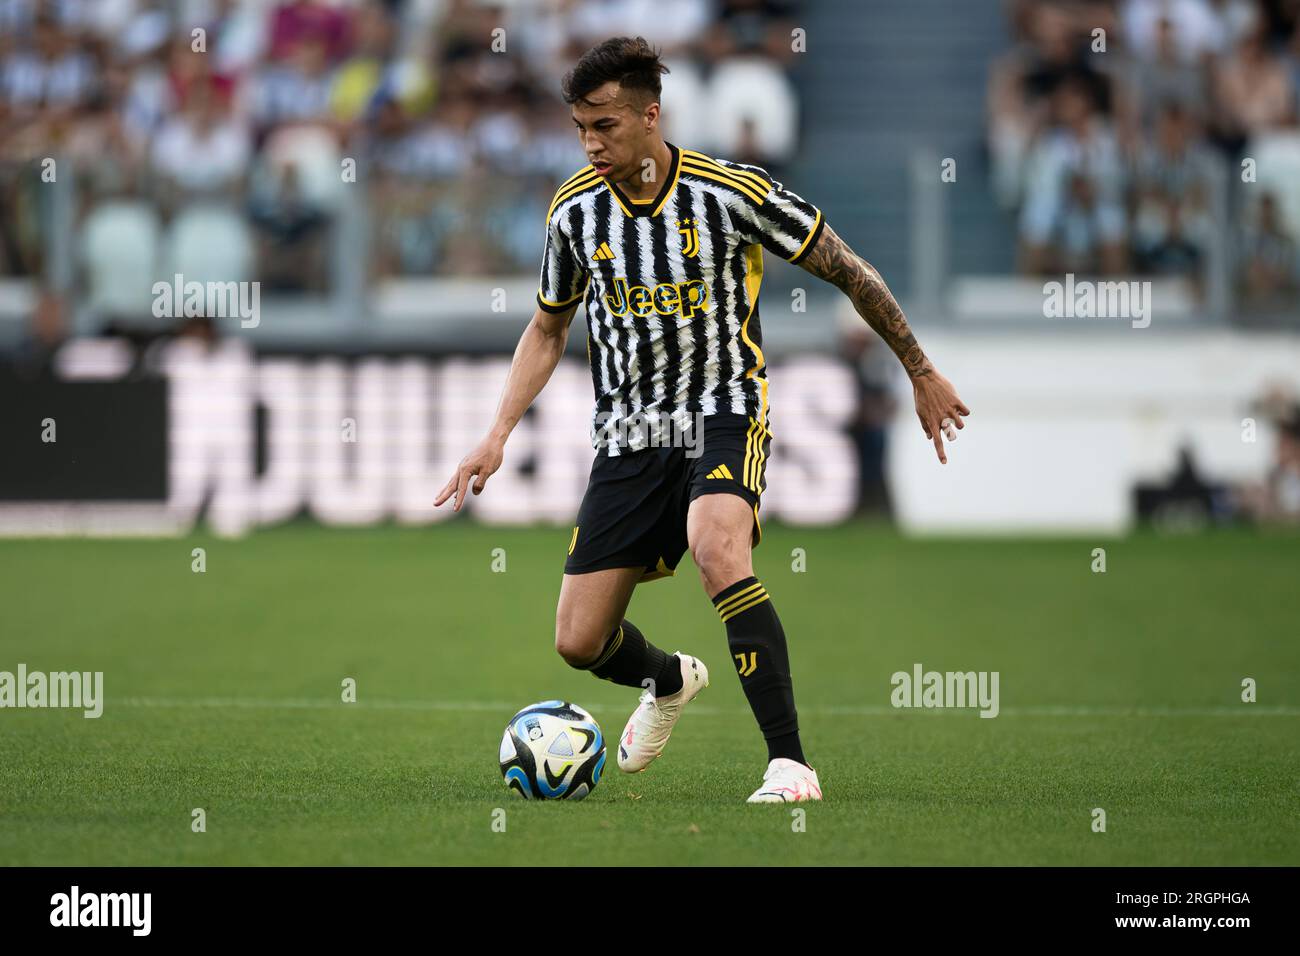 Kaio Jorge of Juventus FC in action during the friendly football match between Juventus FC and Juventus Next Gen. Stock Photo